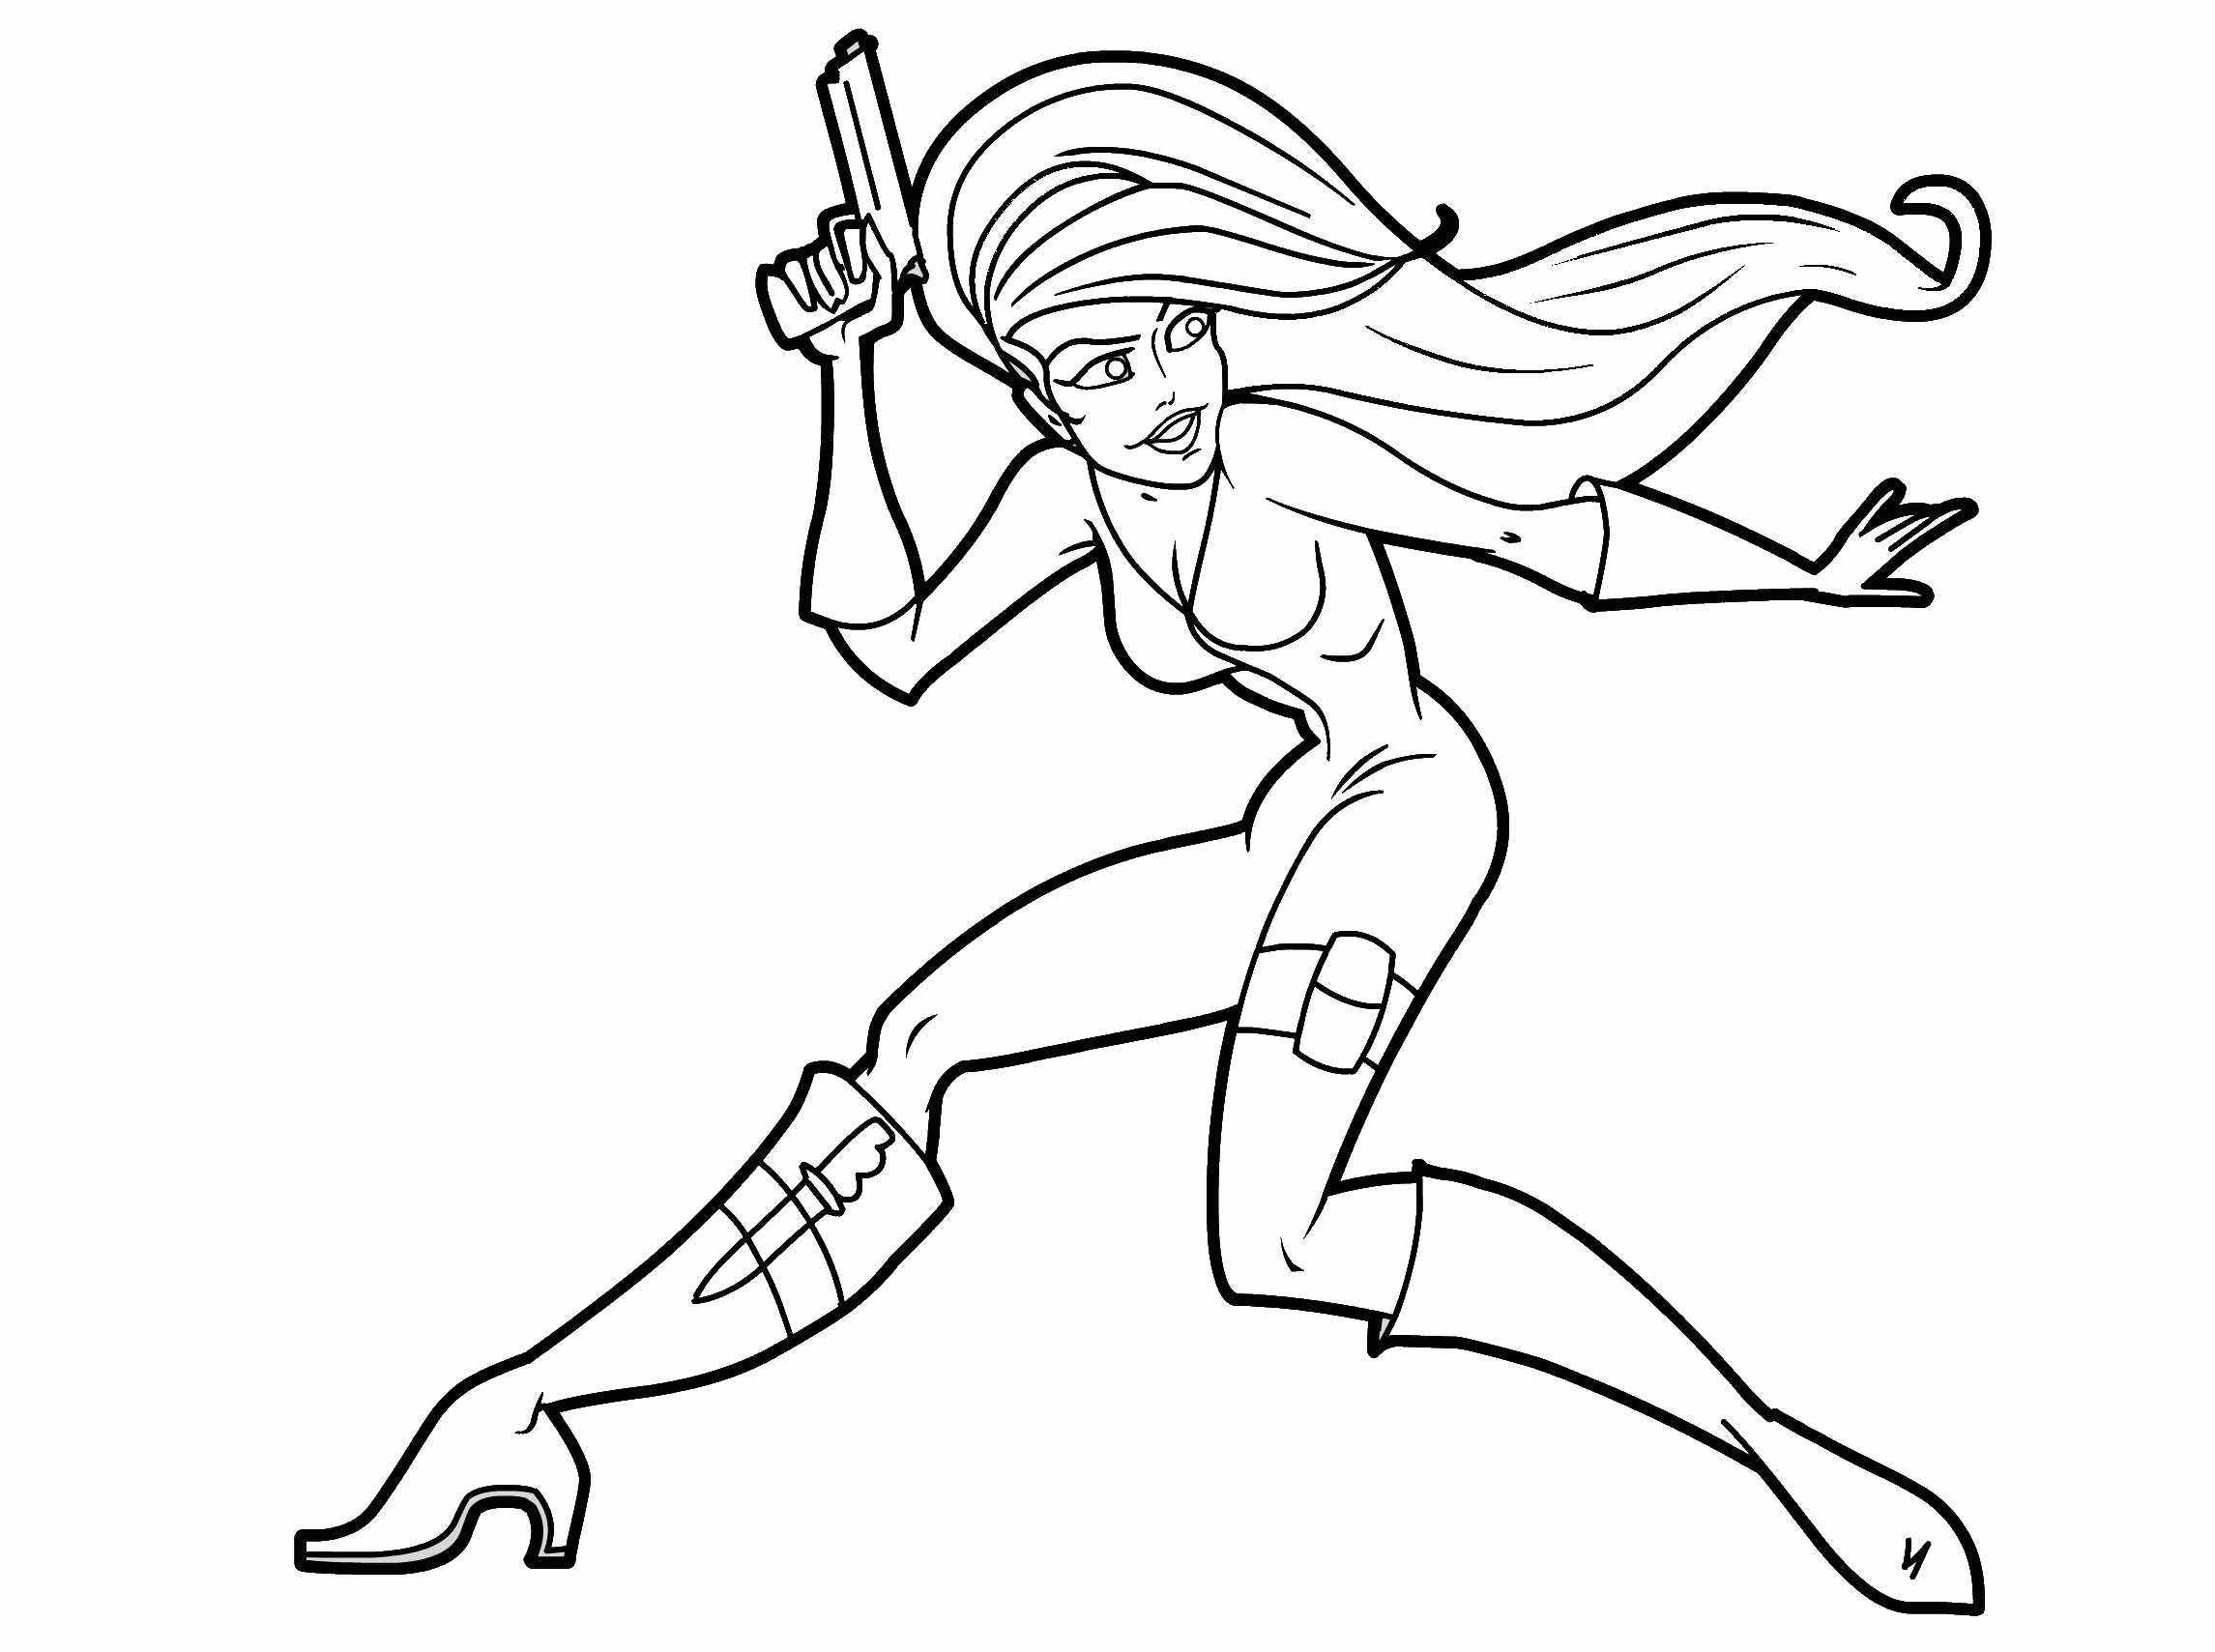 Spy coloring pages to download and print for free